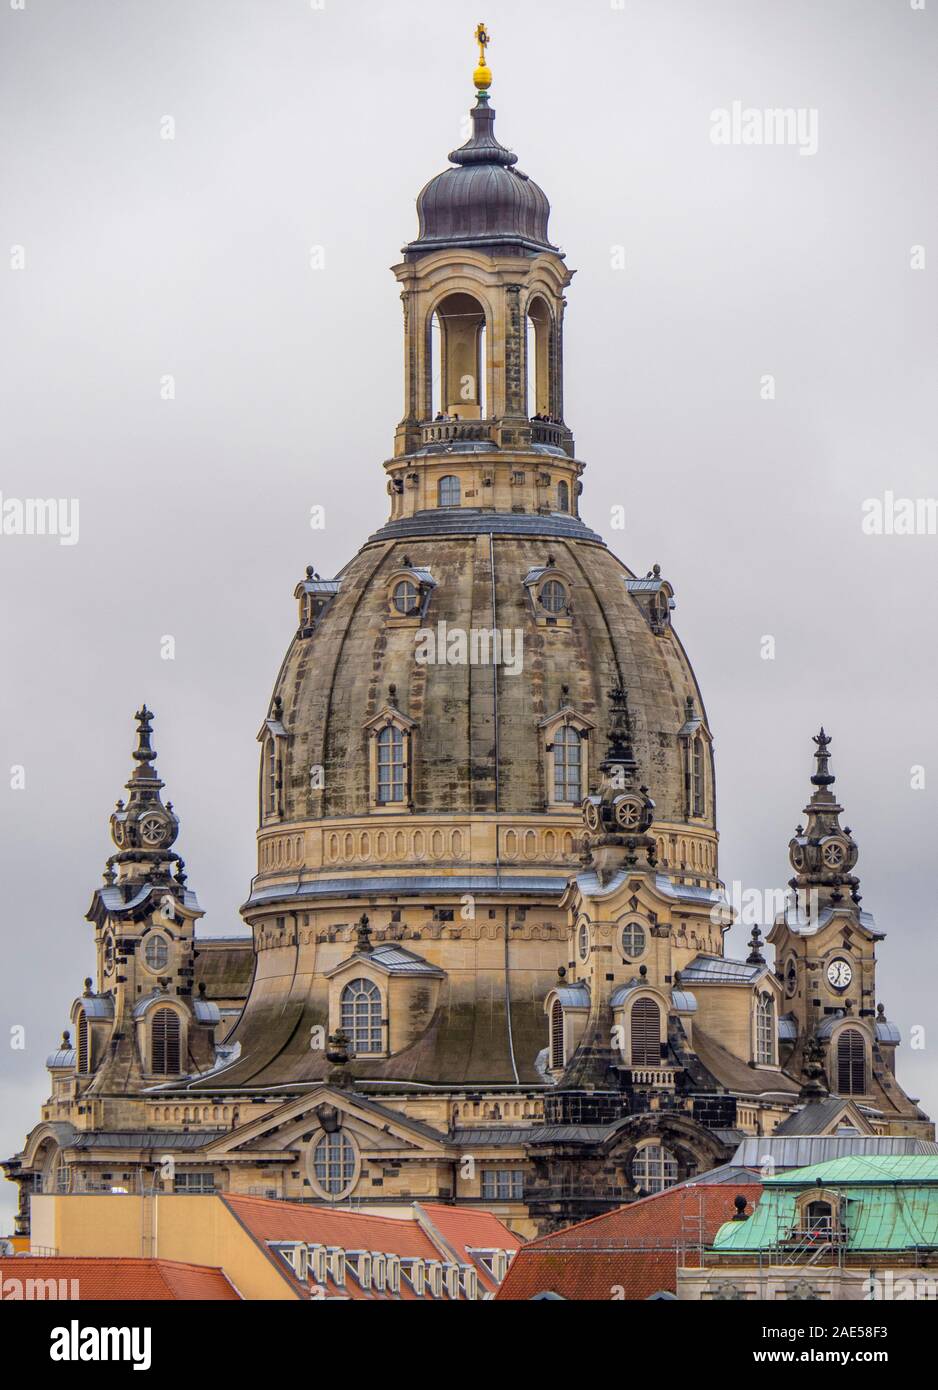 Dome and cupola of baroque Frauenkirche Altstadt Dresden Saxony Germany. Stock Photo